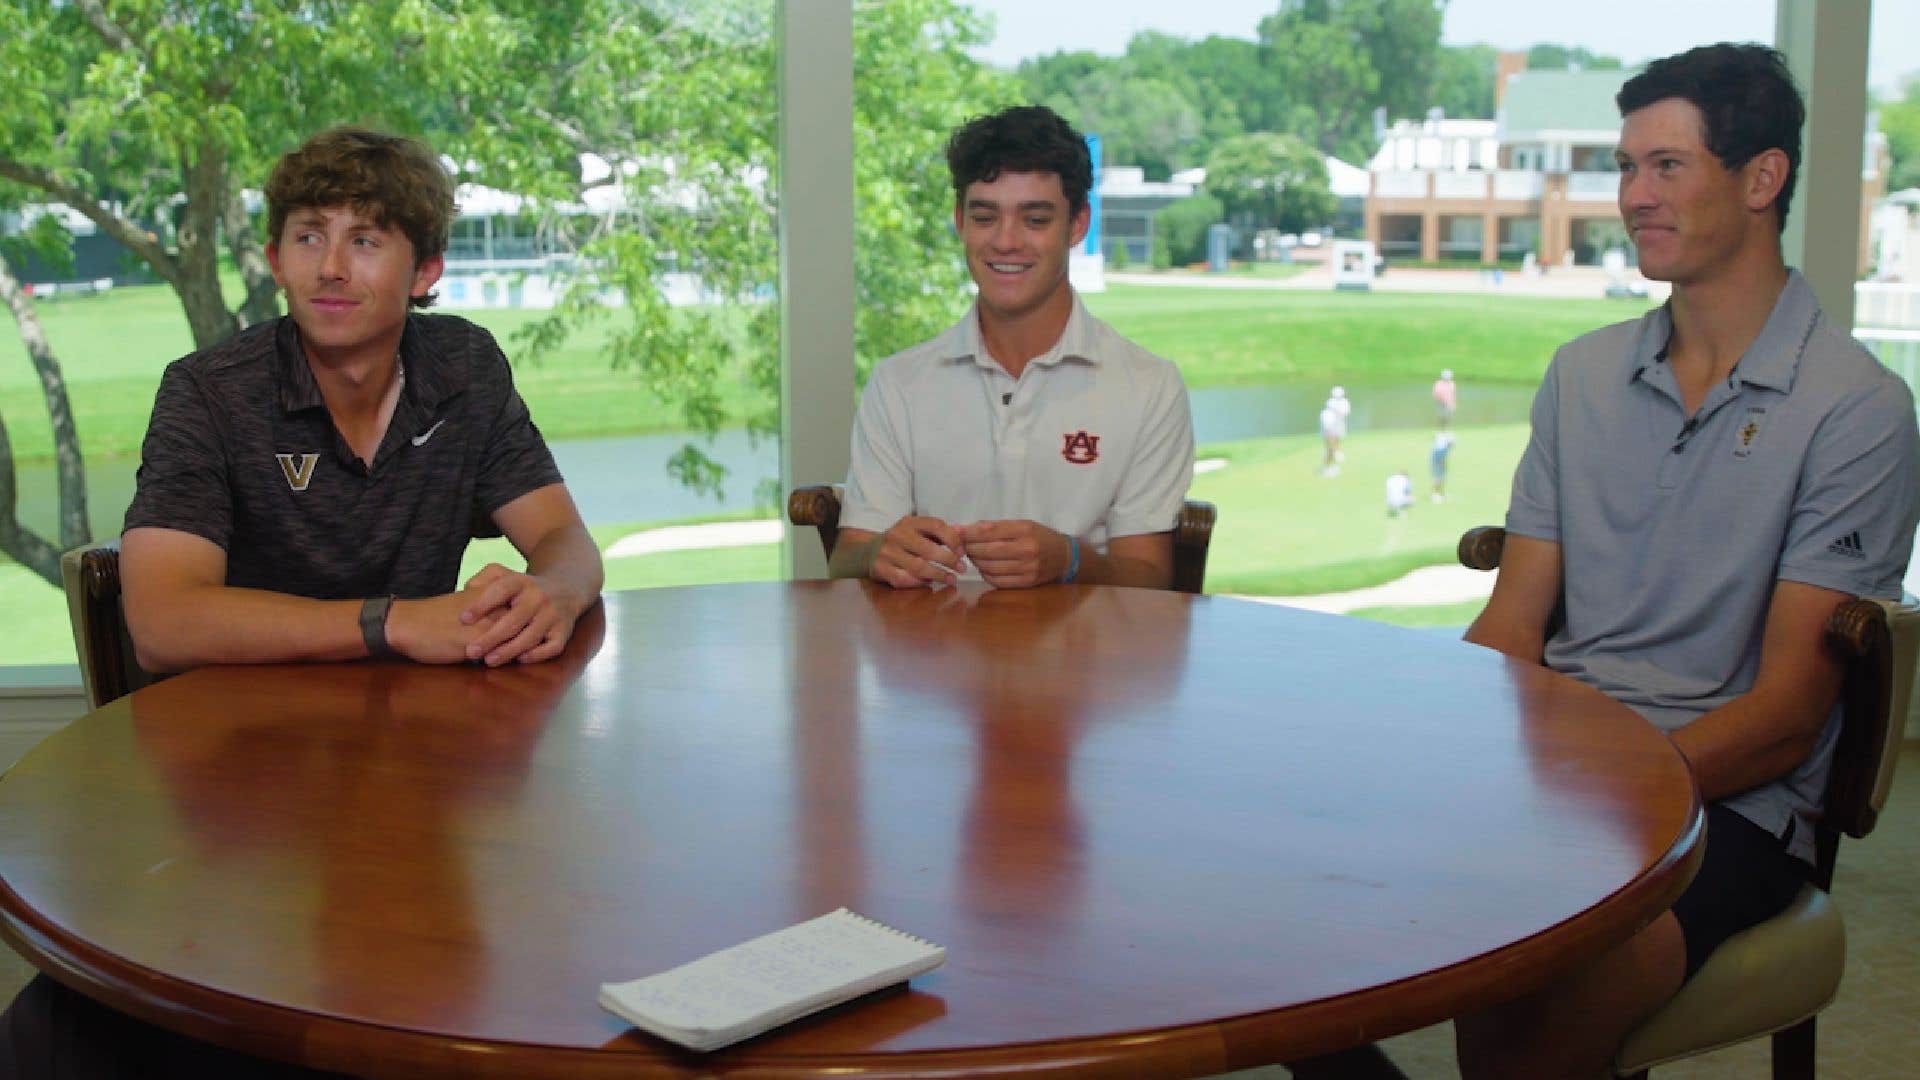 The 3 best players in college golf explain how they view the sport's future